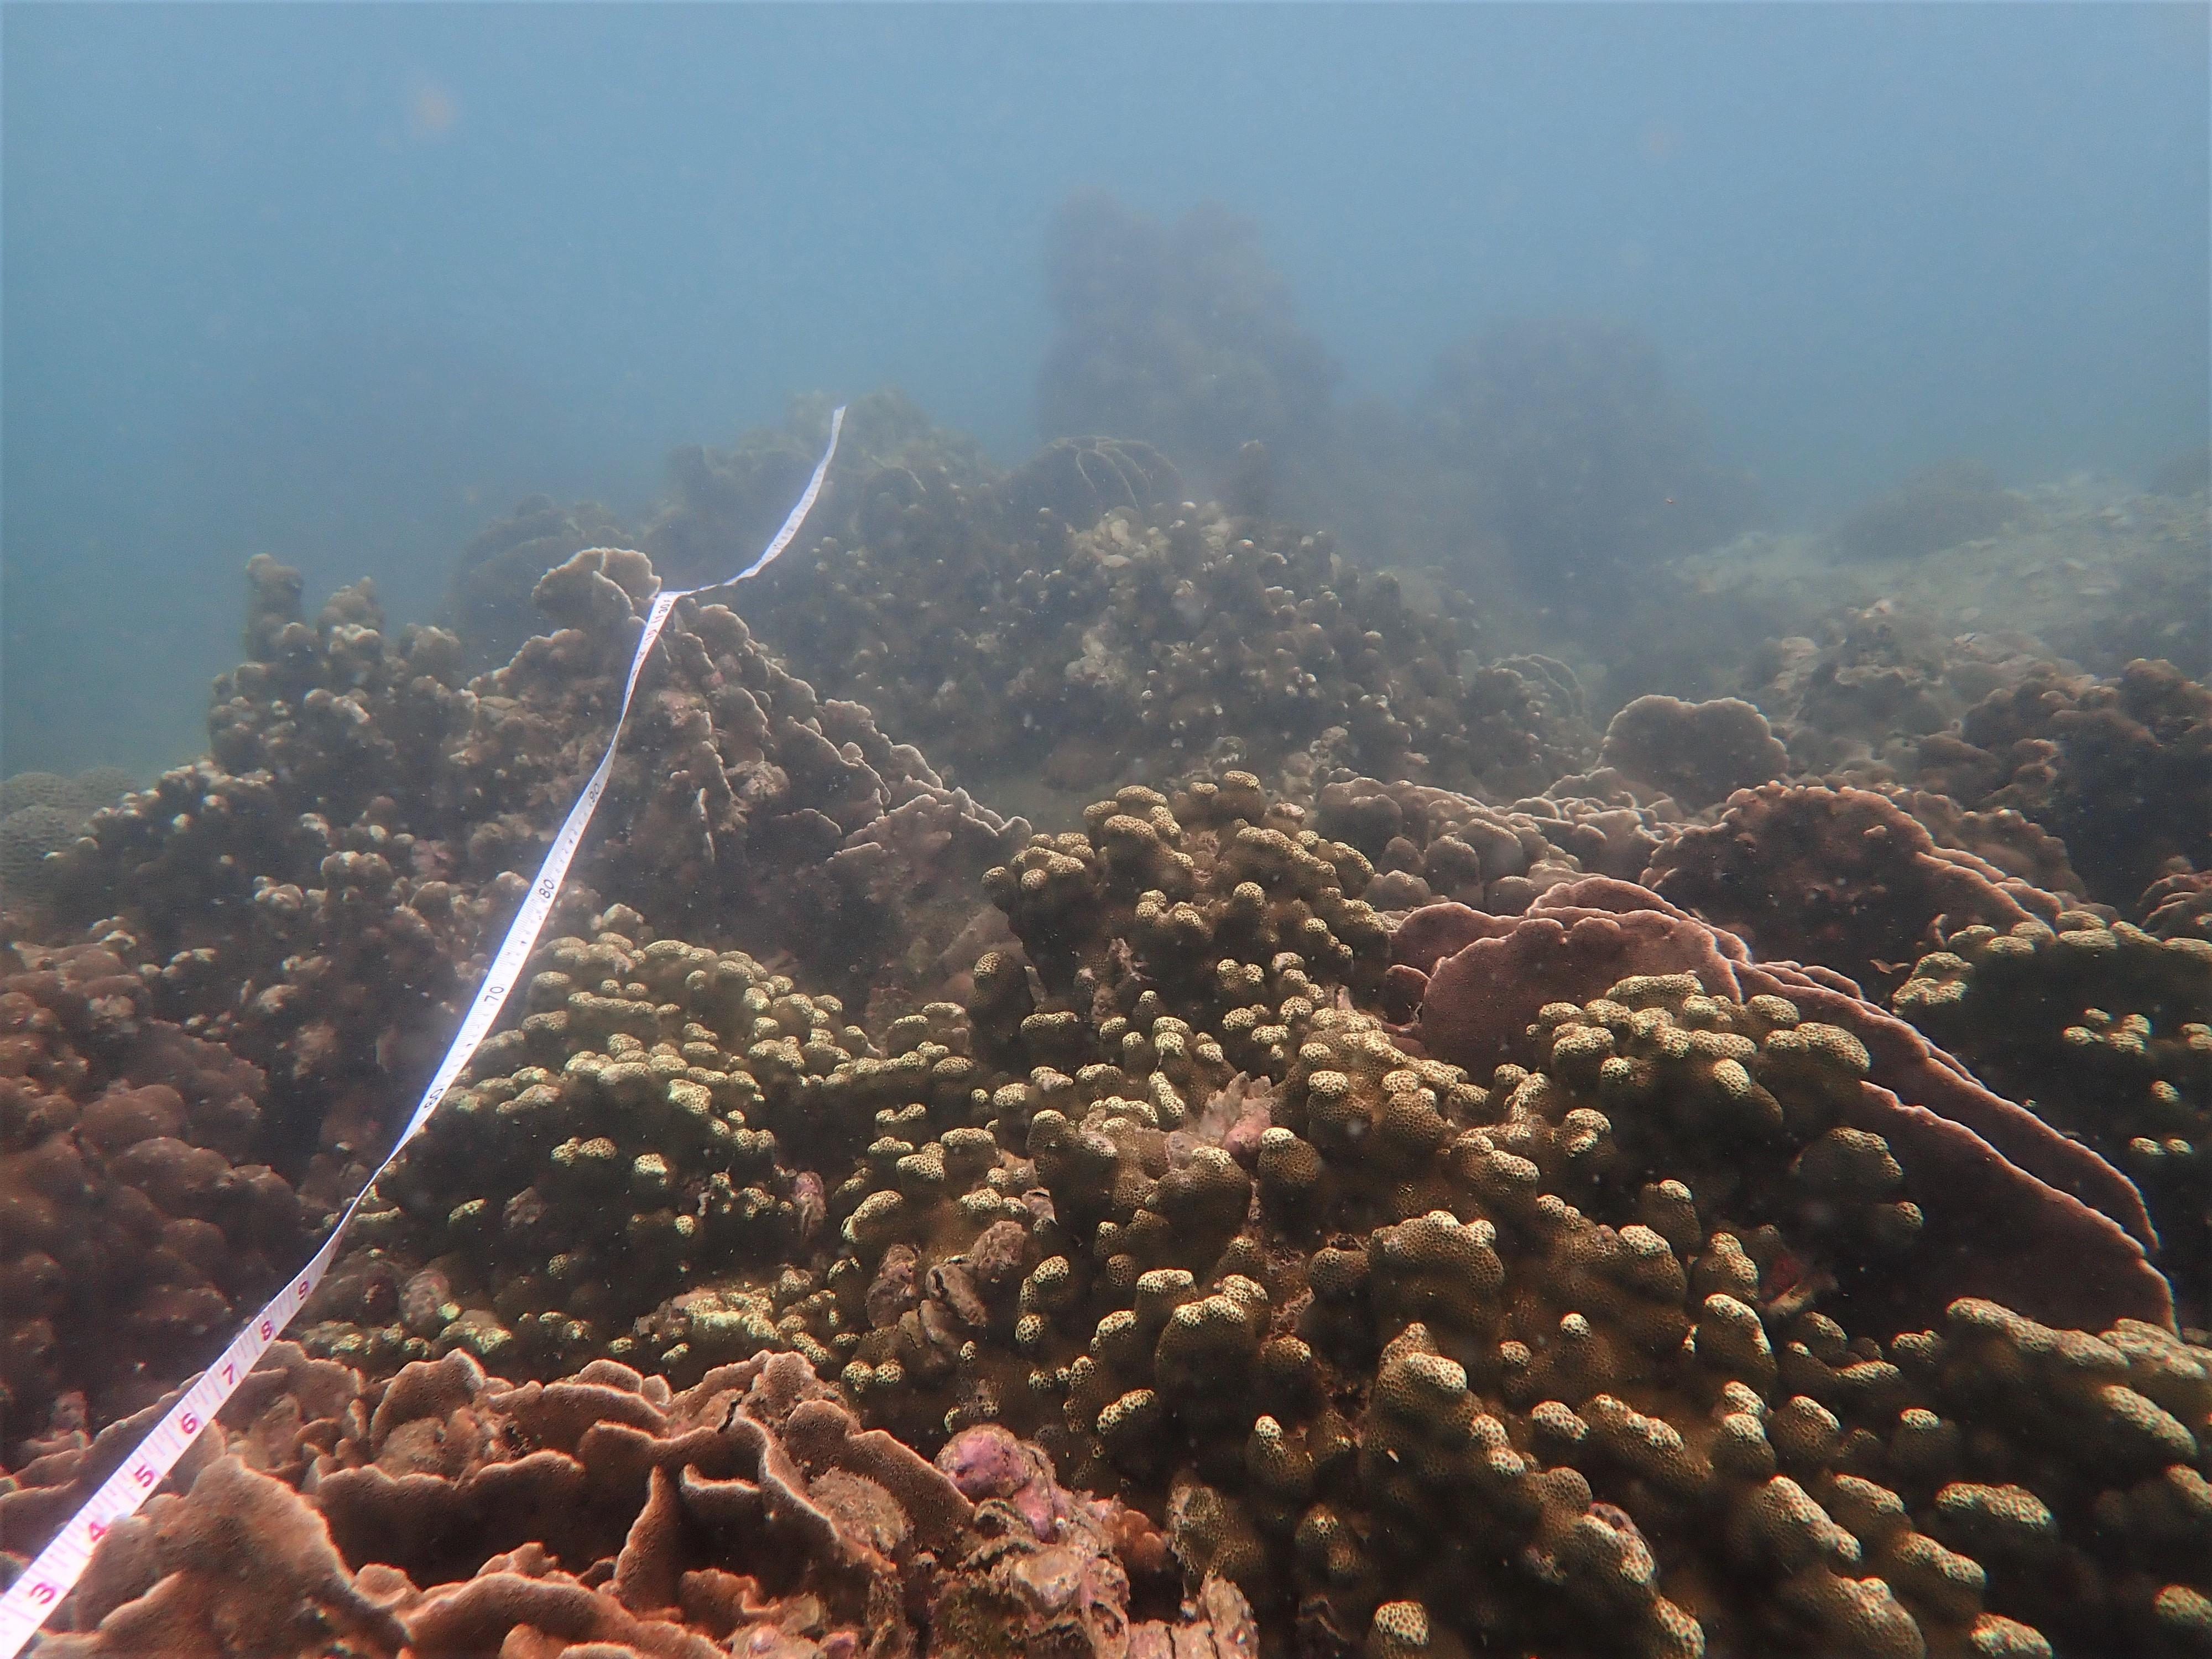 The Agriculture, Fisheries and Conservation Department announced today (December 3) that the results of the Hong Kong Reef Check this year showed that local corals are generally in a healthy condition and that the species diversity remains on the high side. Photo shows coral communities and a reef check transect line at Sharp Island.